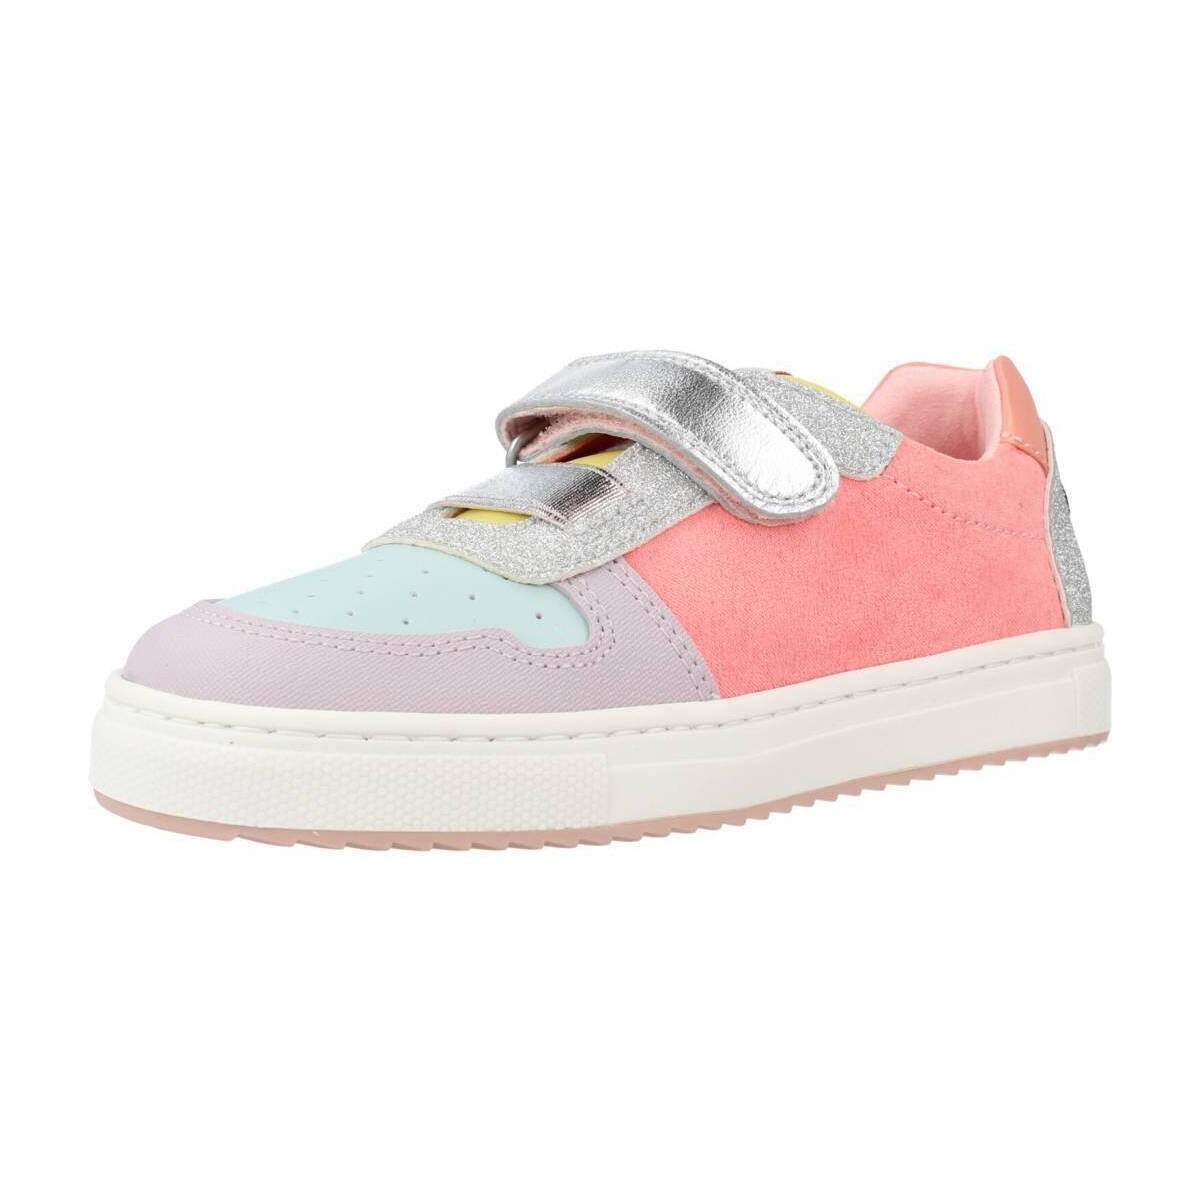 Chaussures Fille Baskets basses Garvalin 232332G Multicolore